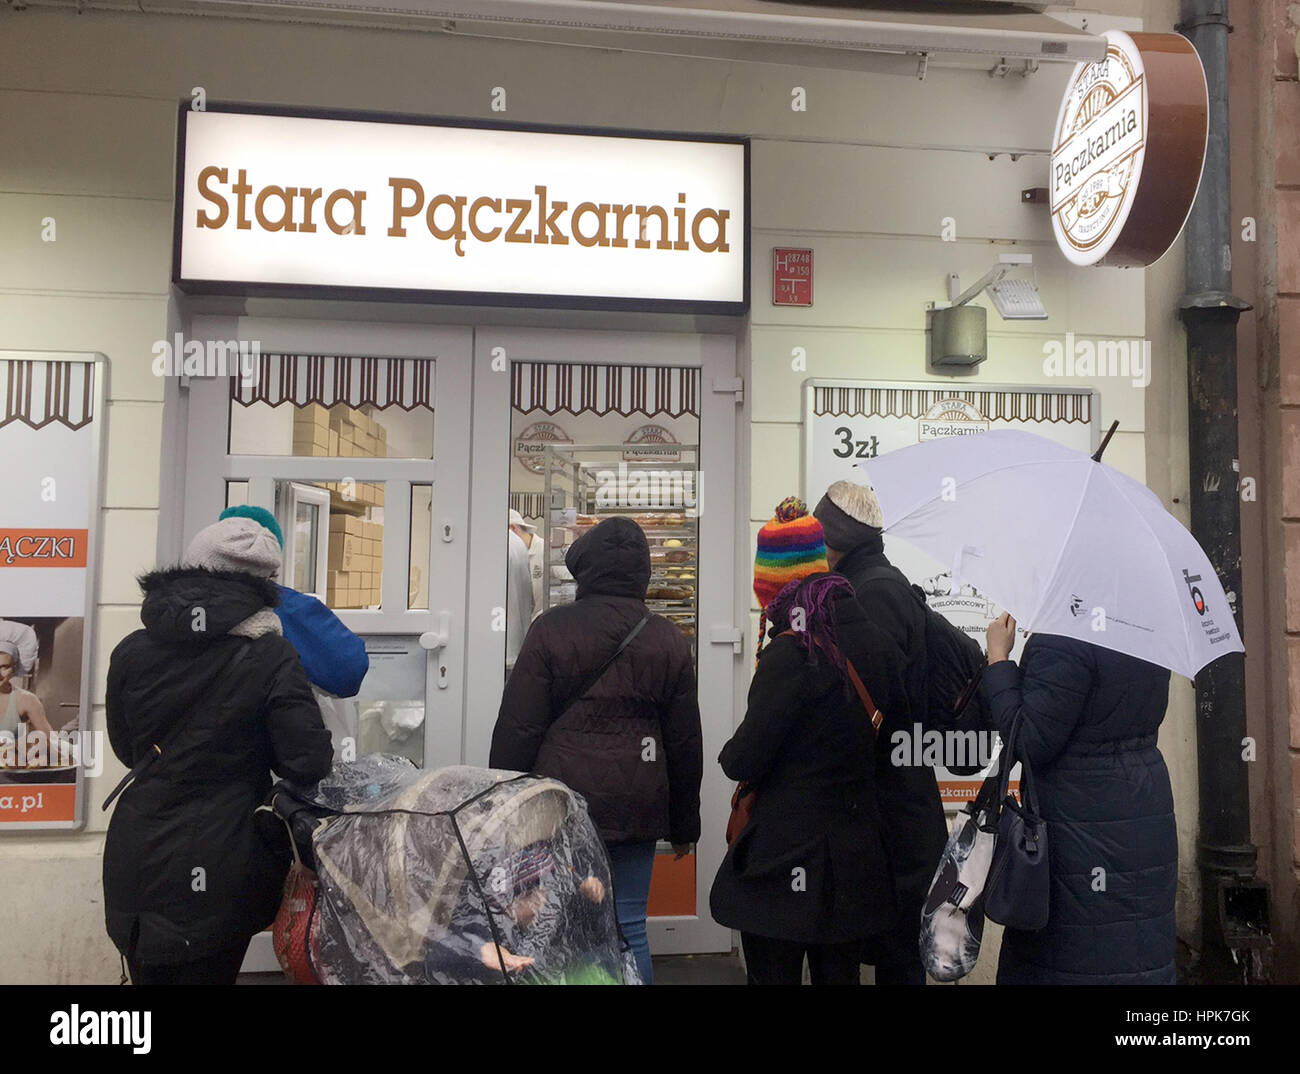 Warsaw, Ppland. 22nd Feb, 2017. Customers waiting in front of the Stara Paczkarnia (lt. Old Pancake Bakery) patisserie on Nowy Swiat in Warsaw, Ppland, 22 February 2017. Numerous Poles are waiting in front of the shop for sweets: with sweet and particularly greasy pastries they will celebrate the favorite holiday day of Polish sweets, the so-called 'Fat Thursday' (tlusty czwartek). Photo: Natalie Skrzypczak/epa Scanpix Sweden/dpa/Alamy Live News Stock Photo